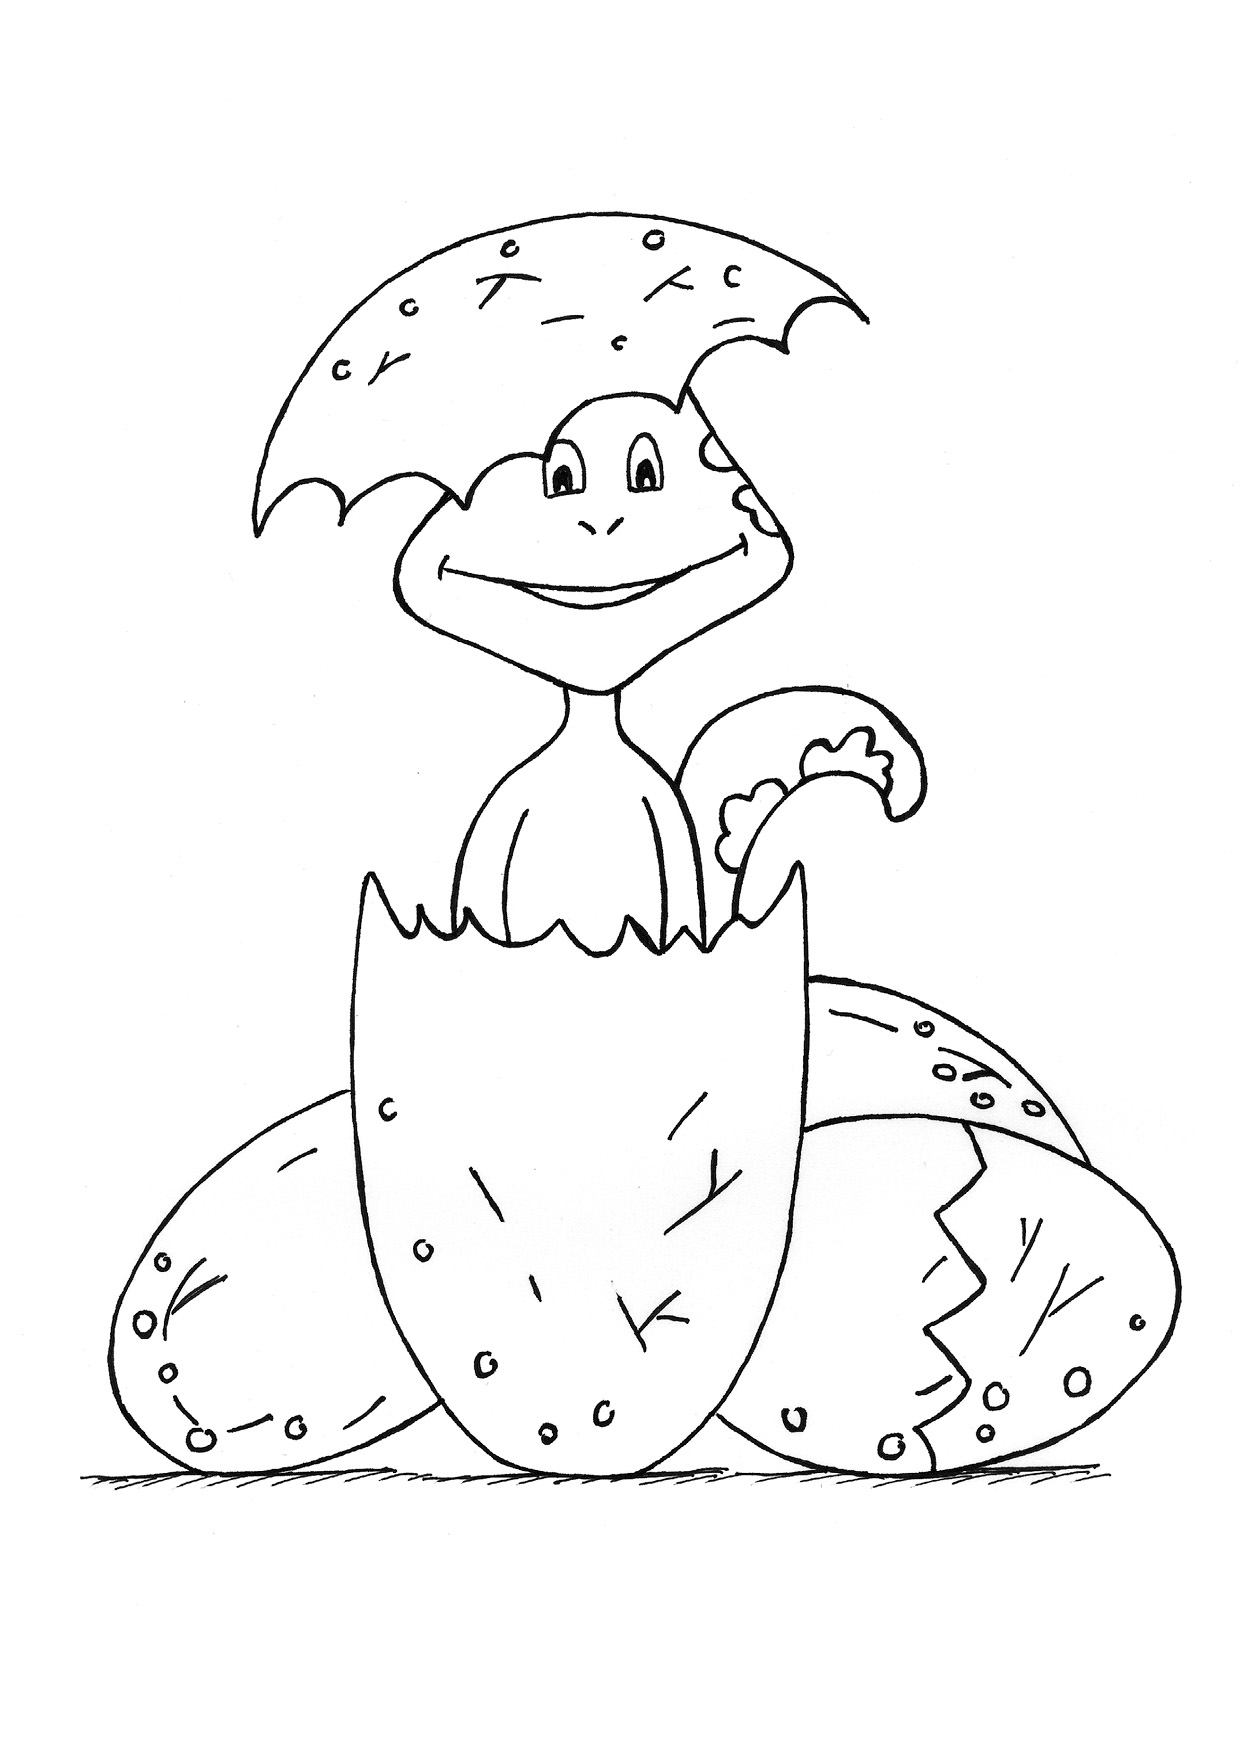 Cute Baby Dinosaur Coloring Pages at GetColorings.com   Free printable ...